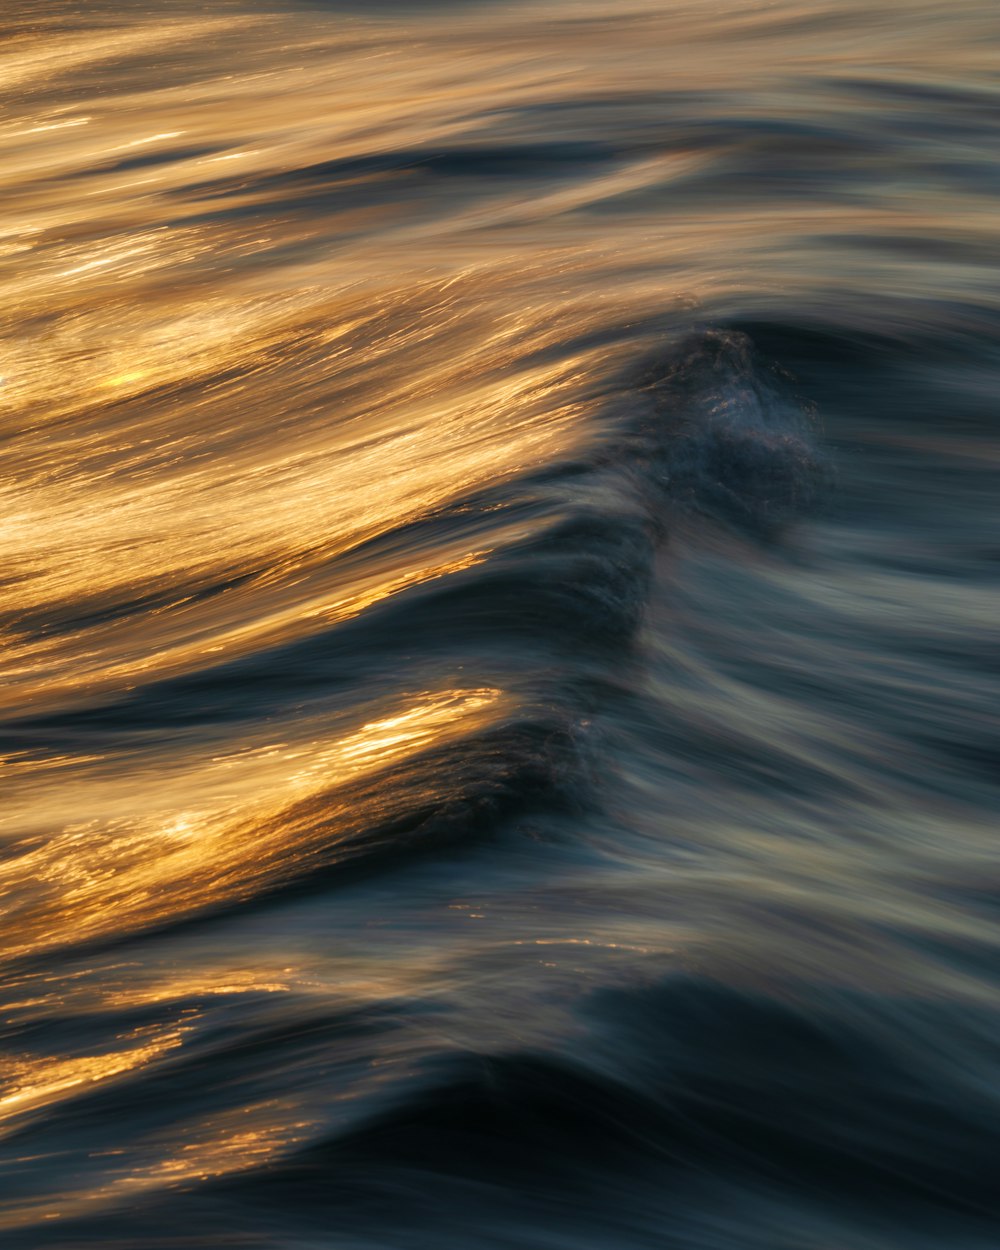 a close up of a wave in the ocean